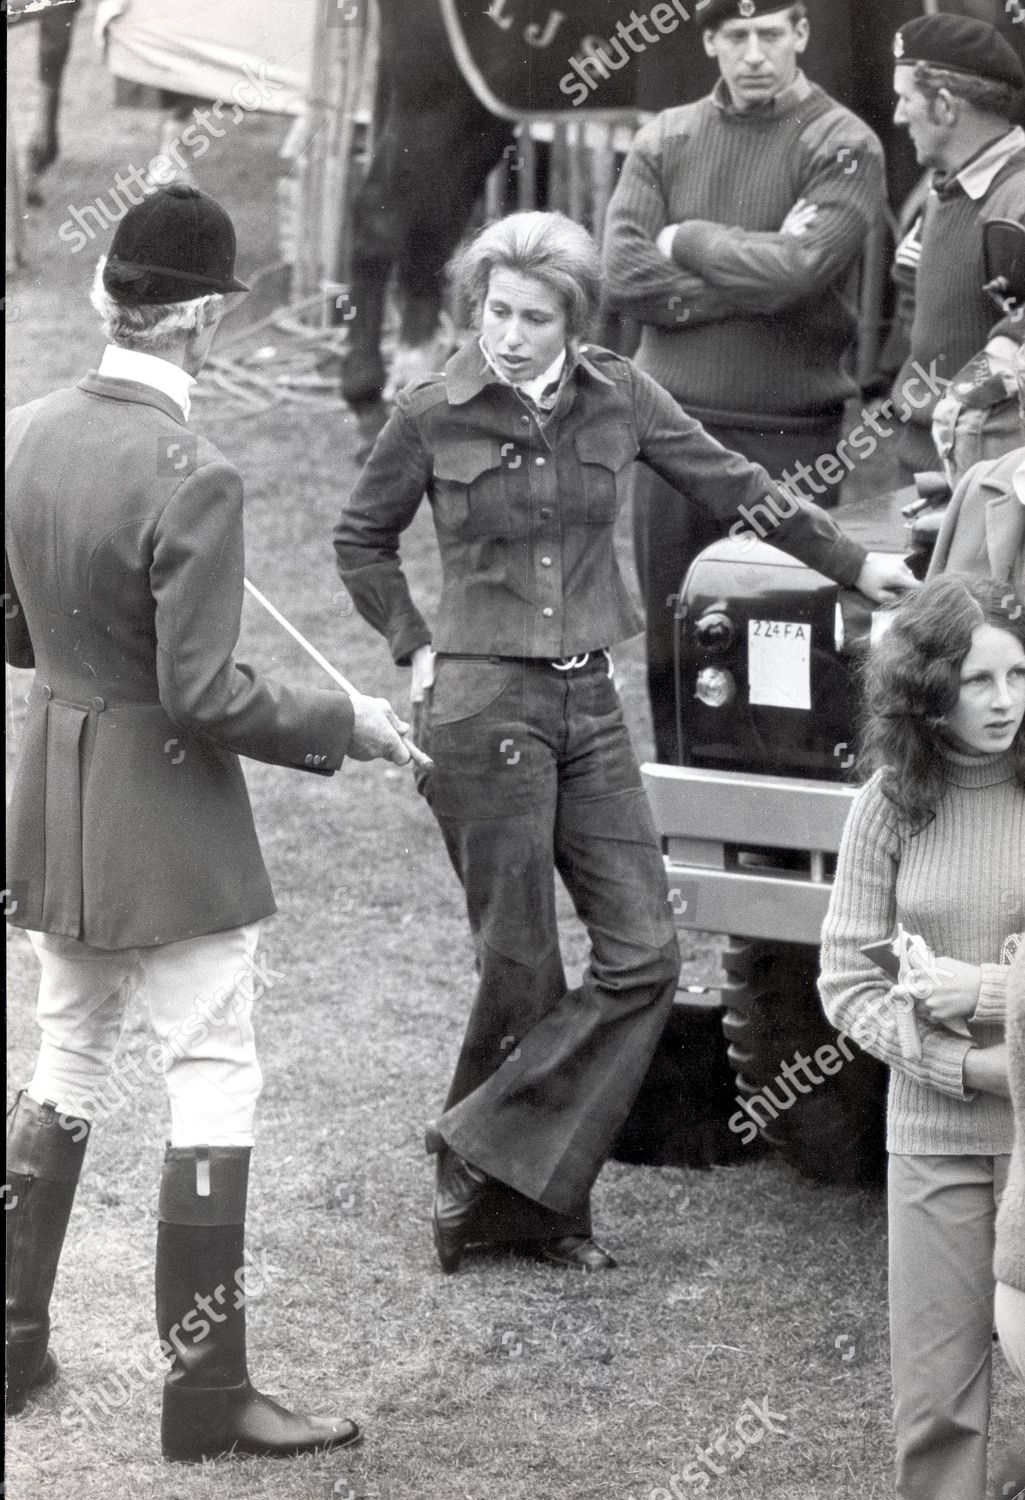 princess-anne-now-princess-royal-1972-picture-shows-princess-anne-as-a-spectator-at-burghly-horse-show-shutterstock-editorial-892357a.jpg